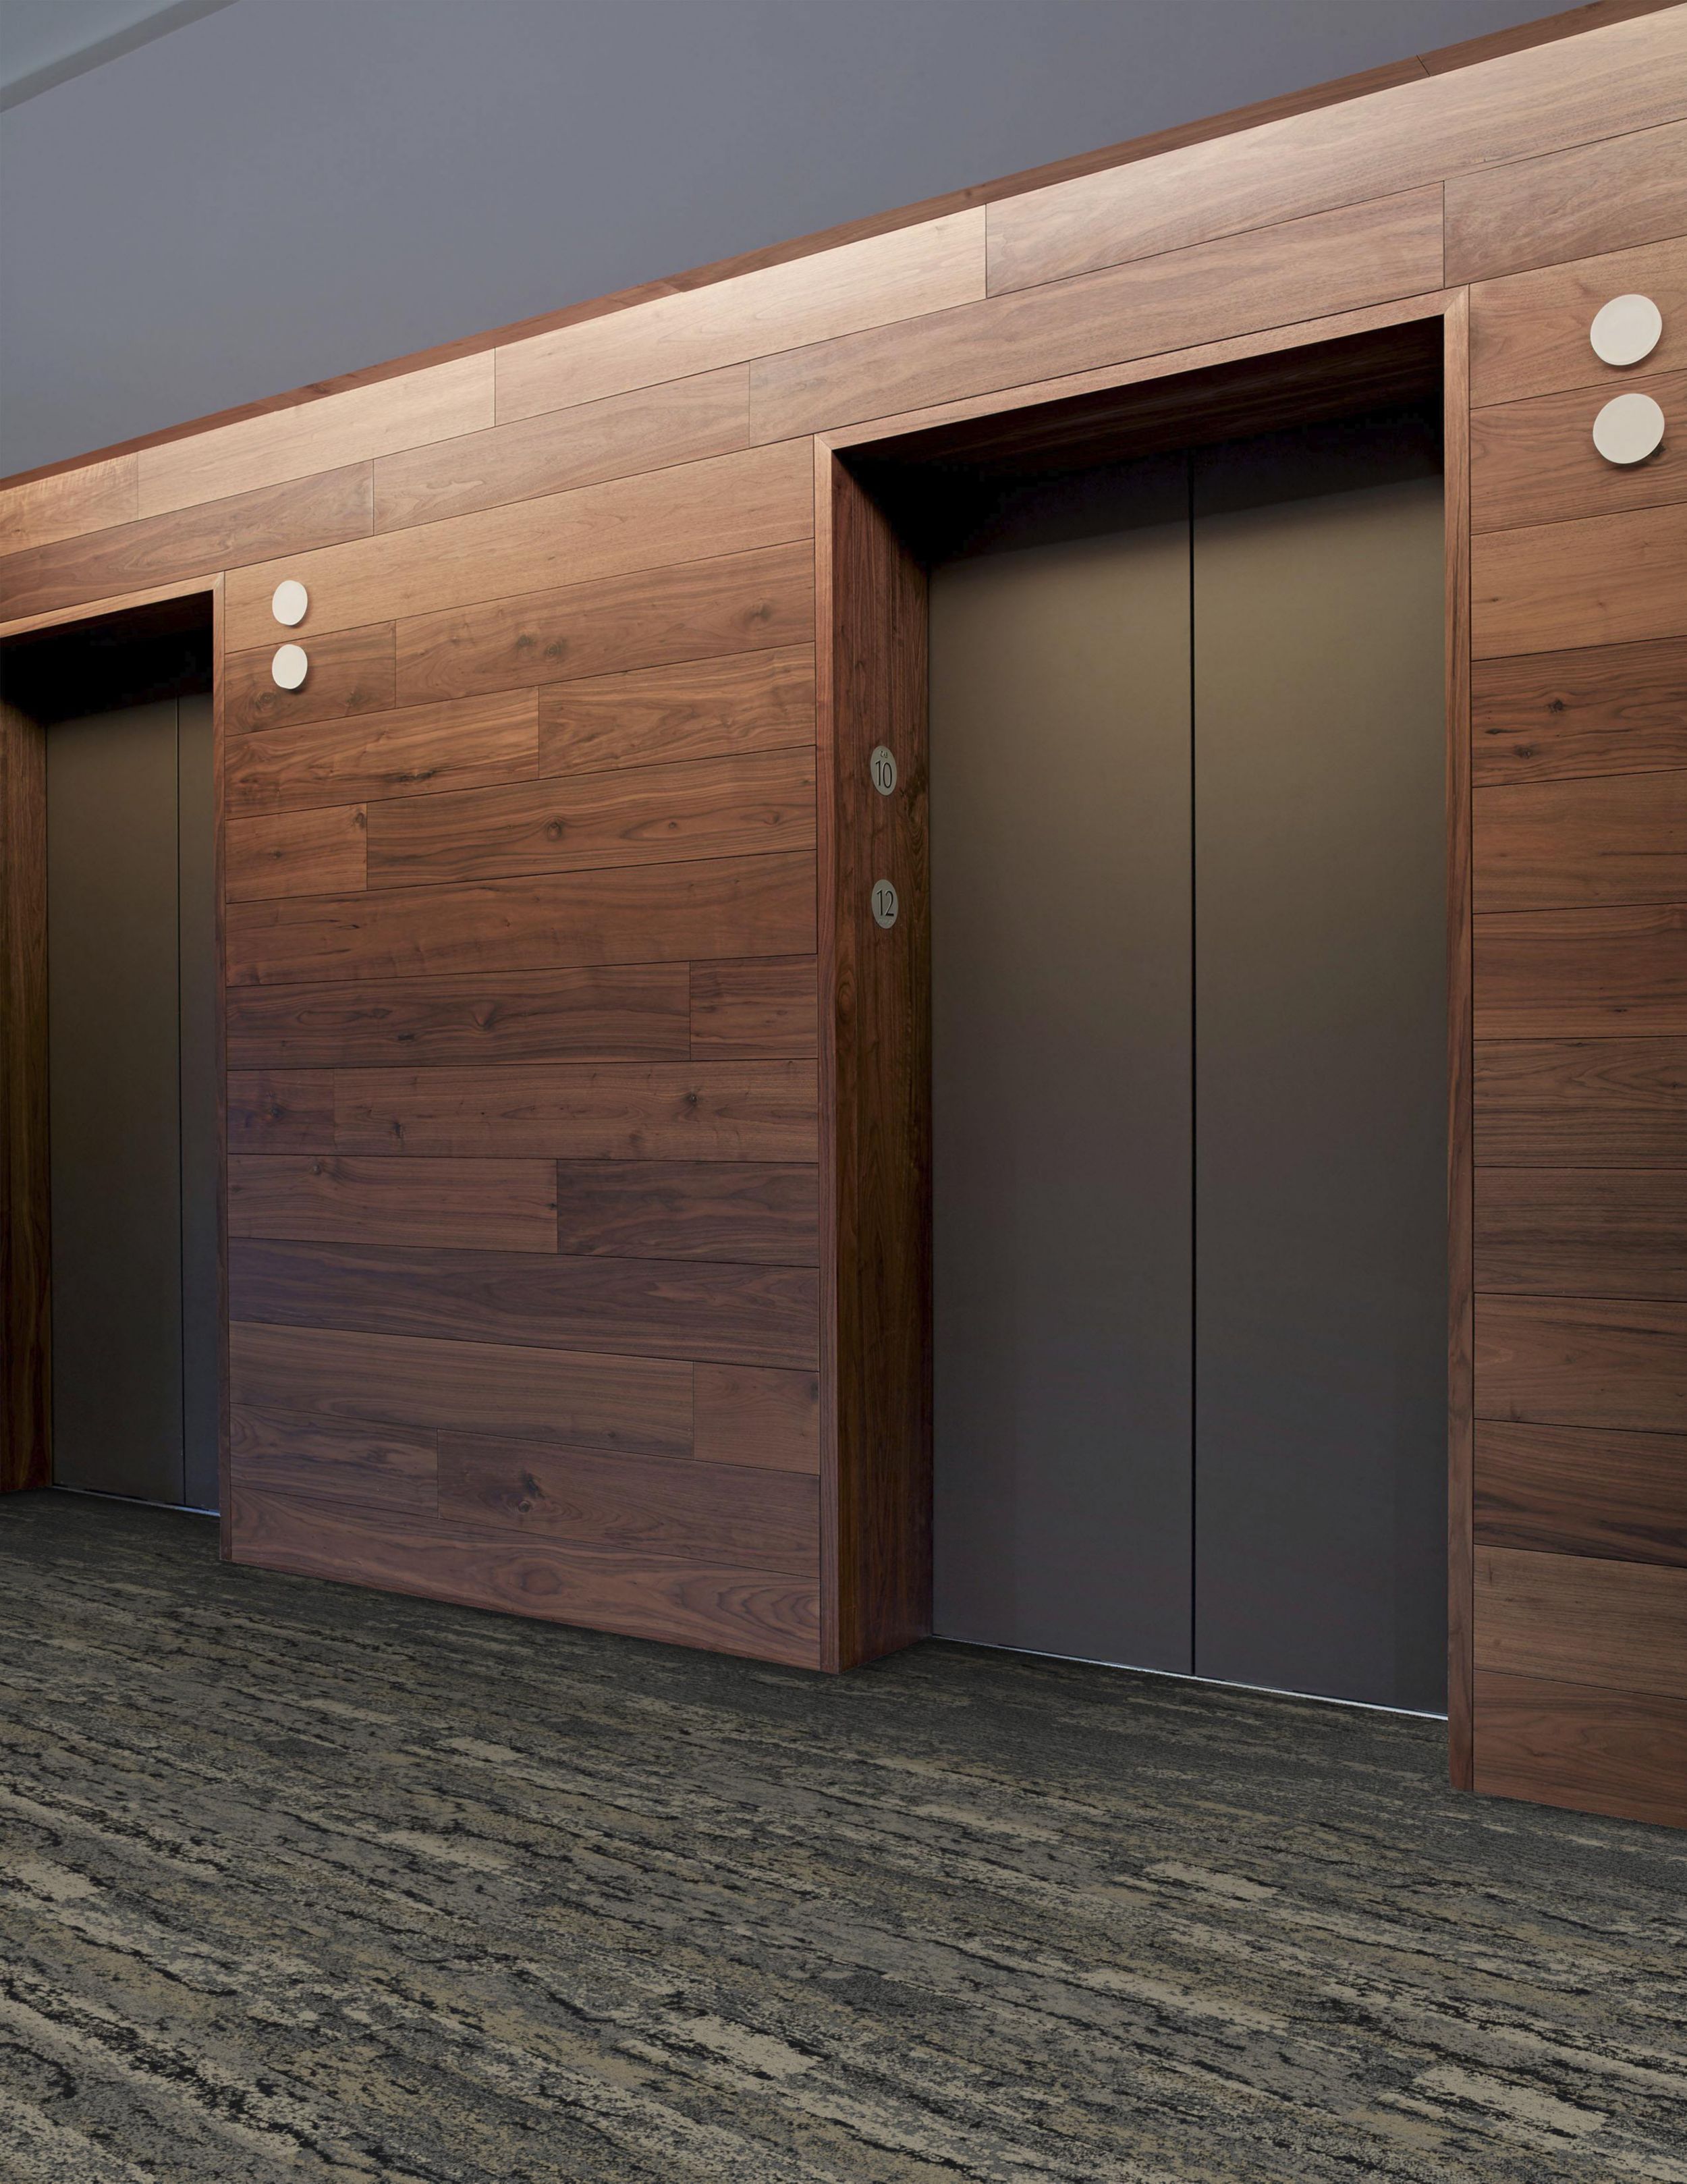 Interface Deeply Rooted and Uprooted plank carpet tile in elevator bank imagen número 7